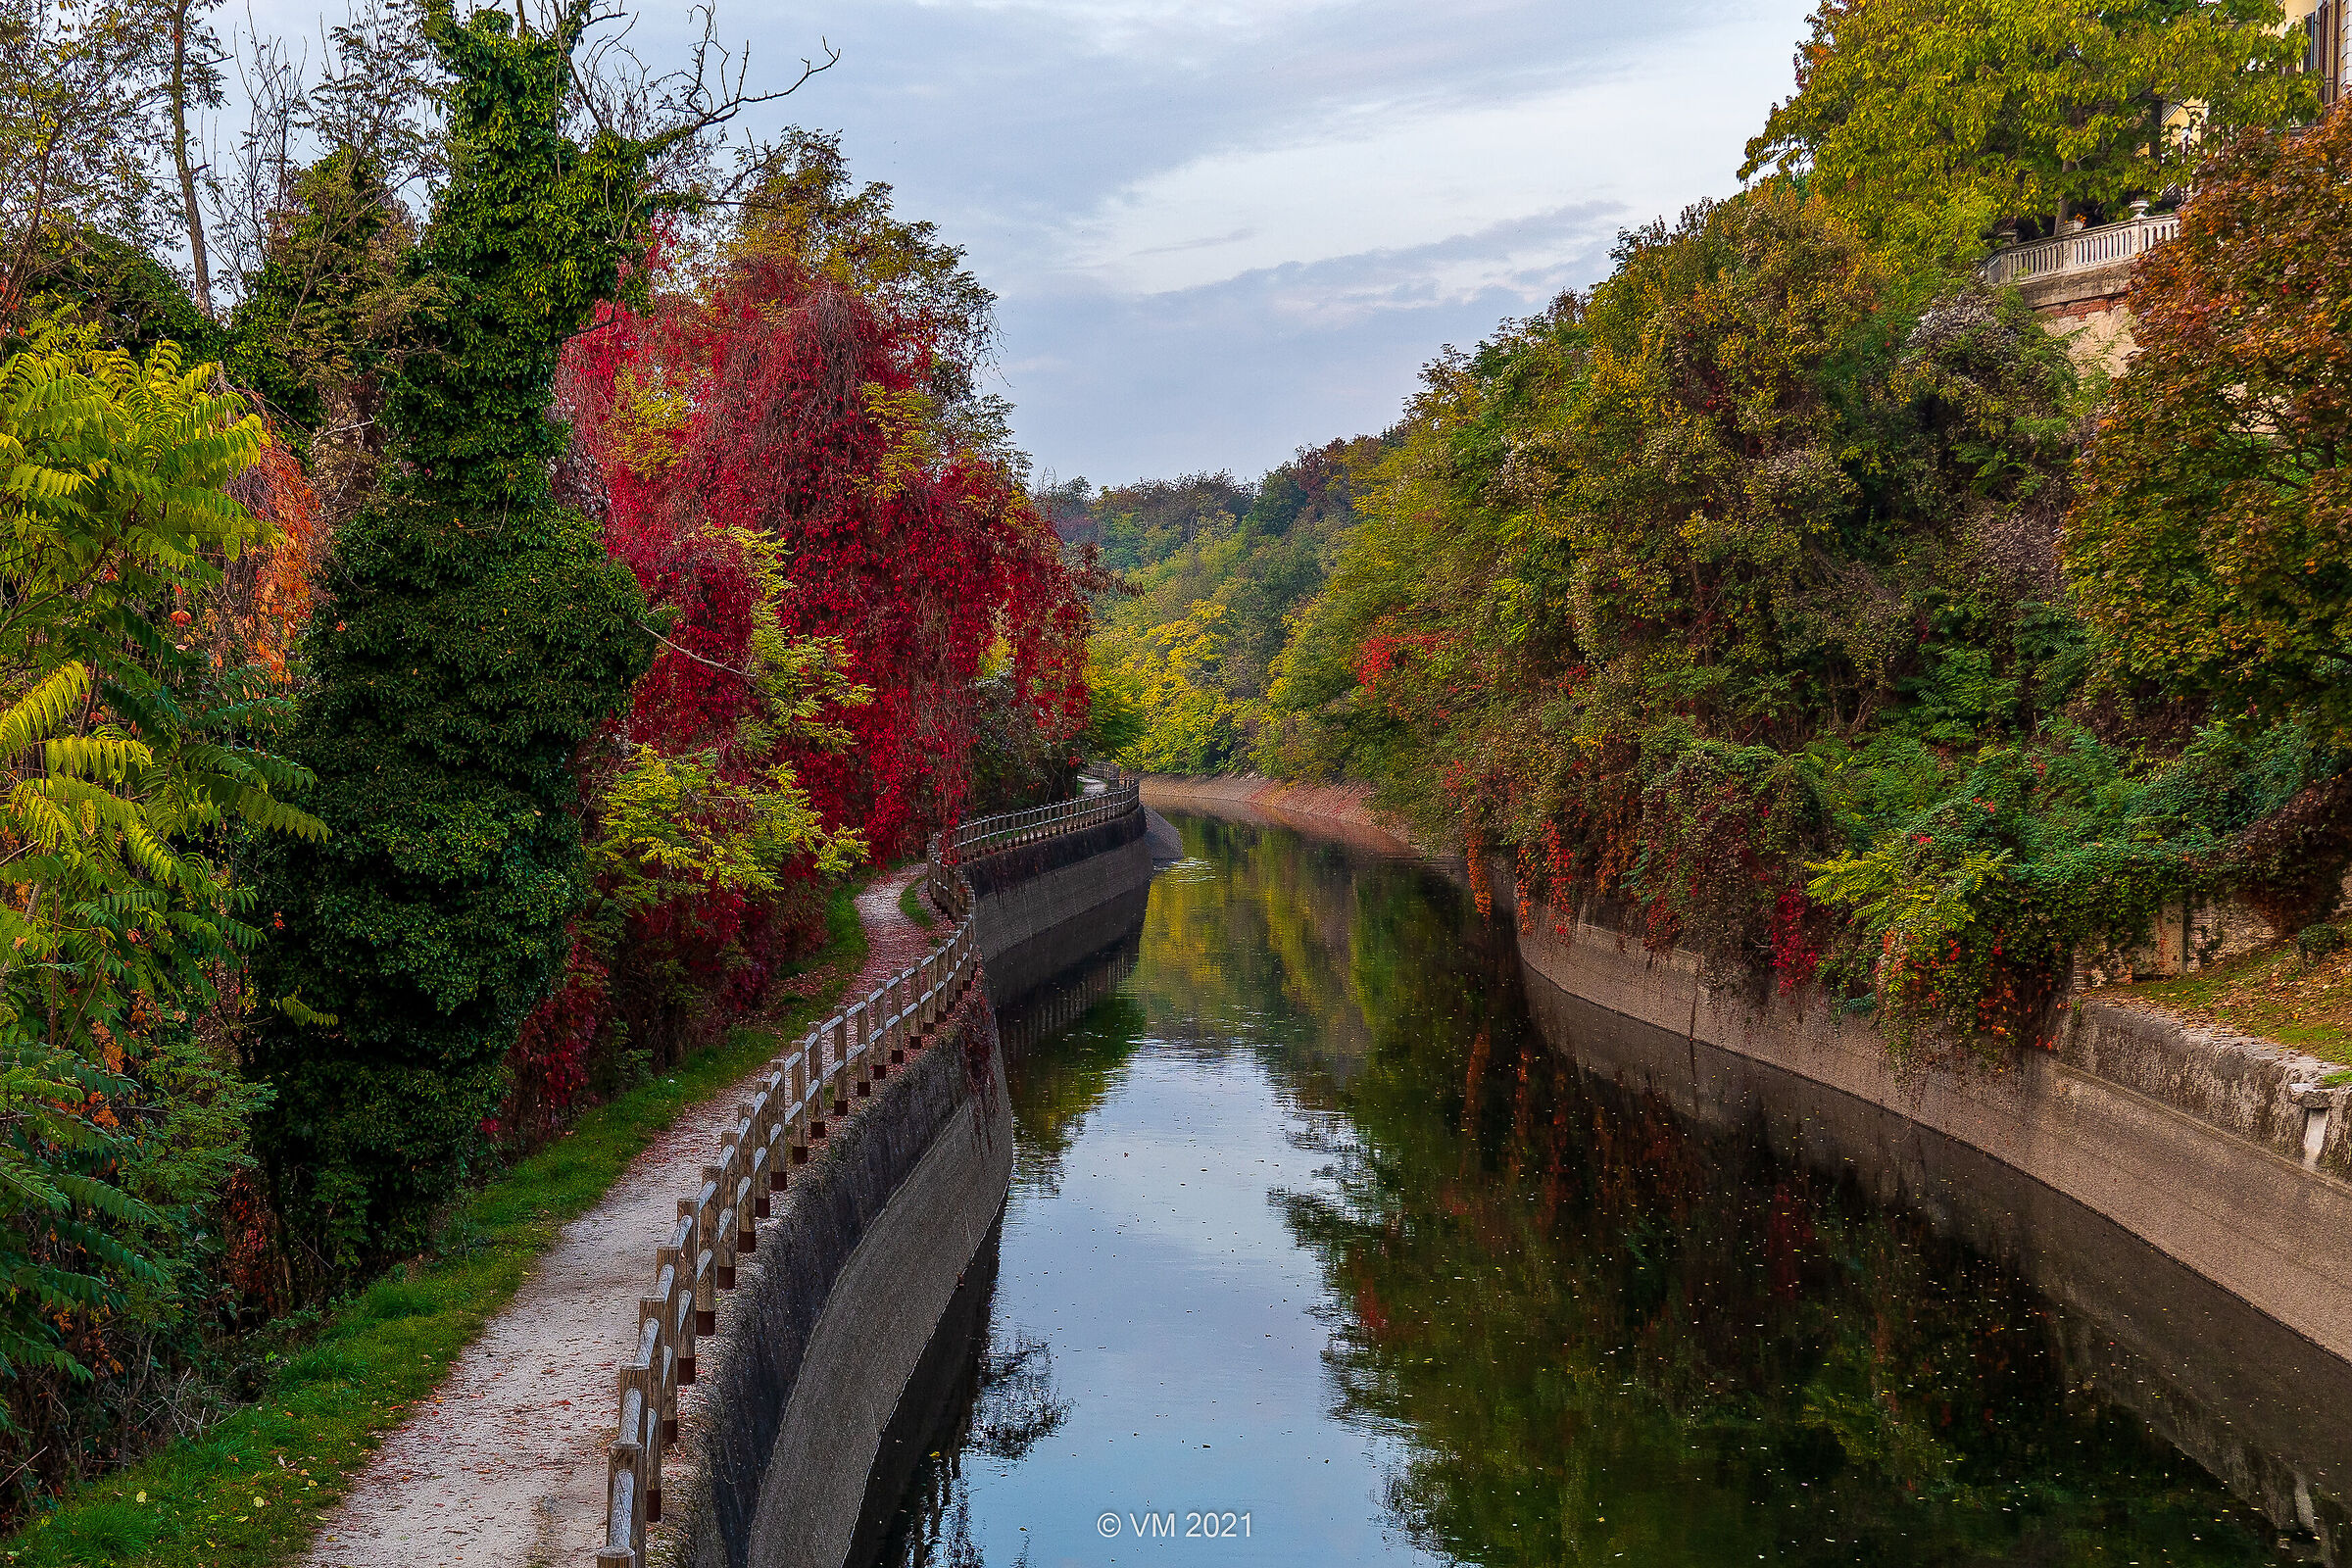 Autumn reflections on the Villoresi canal...